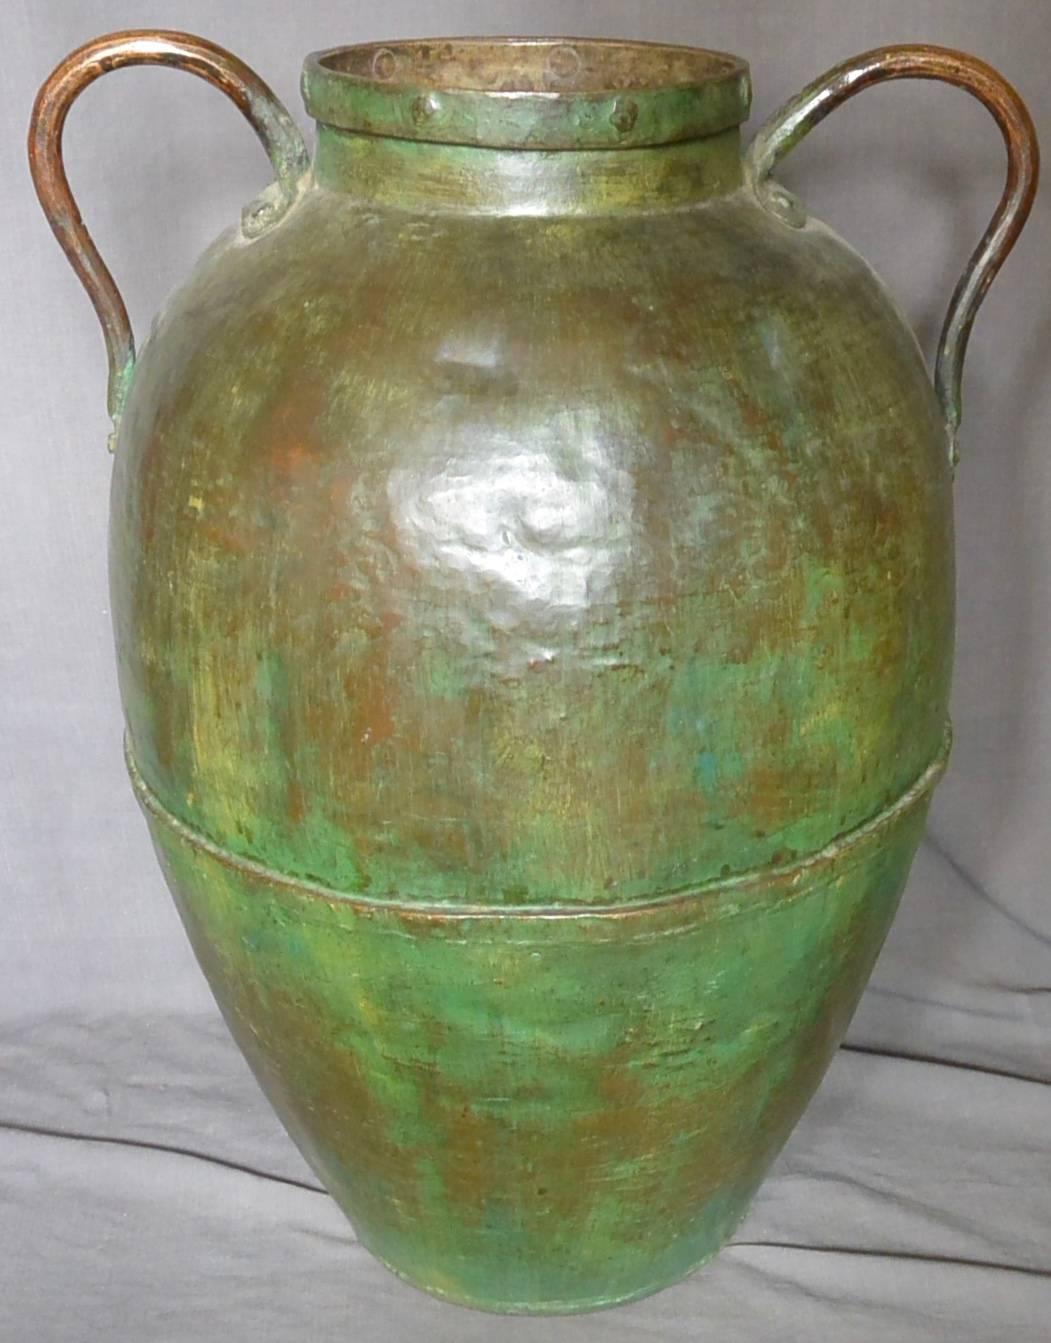 Large Italian urn of waxed patinated copper with handles and rich mottled green color, used originally for oil or water now perfect for umbrellas. Italy, 17th century.
Dimensions: 19